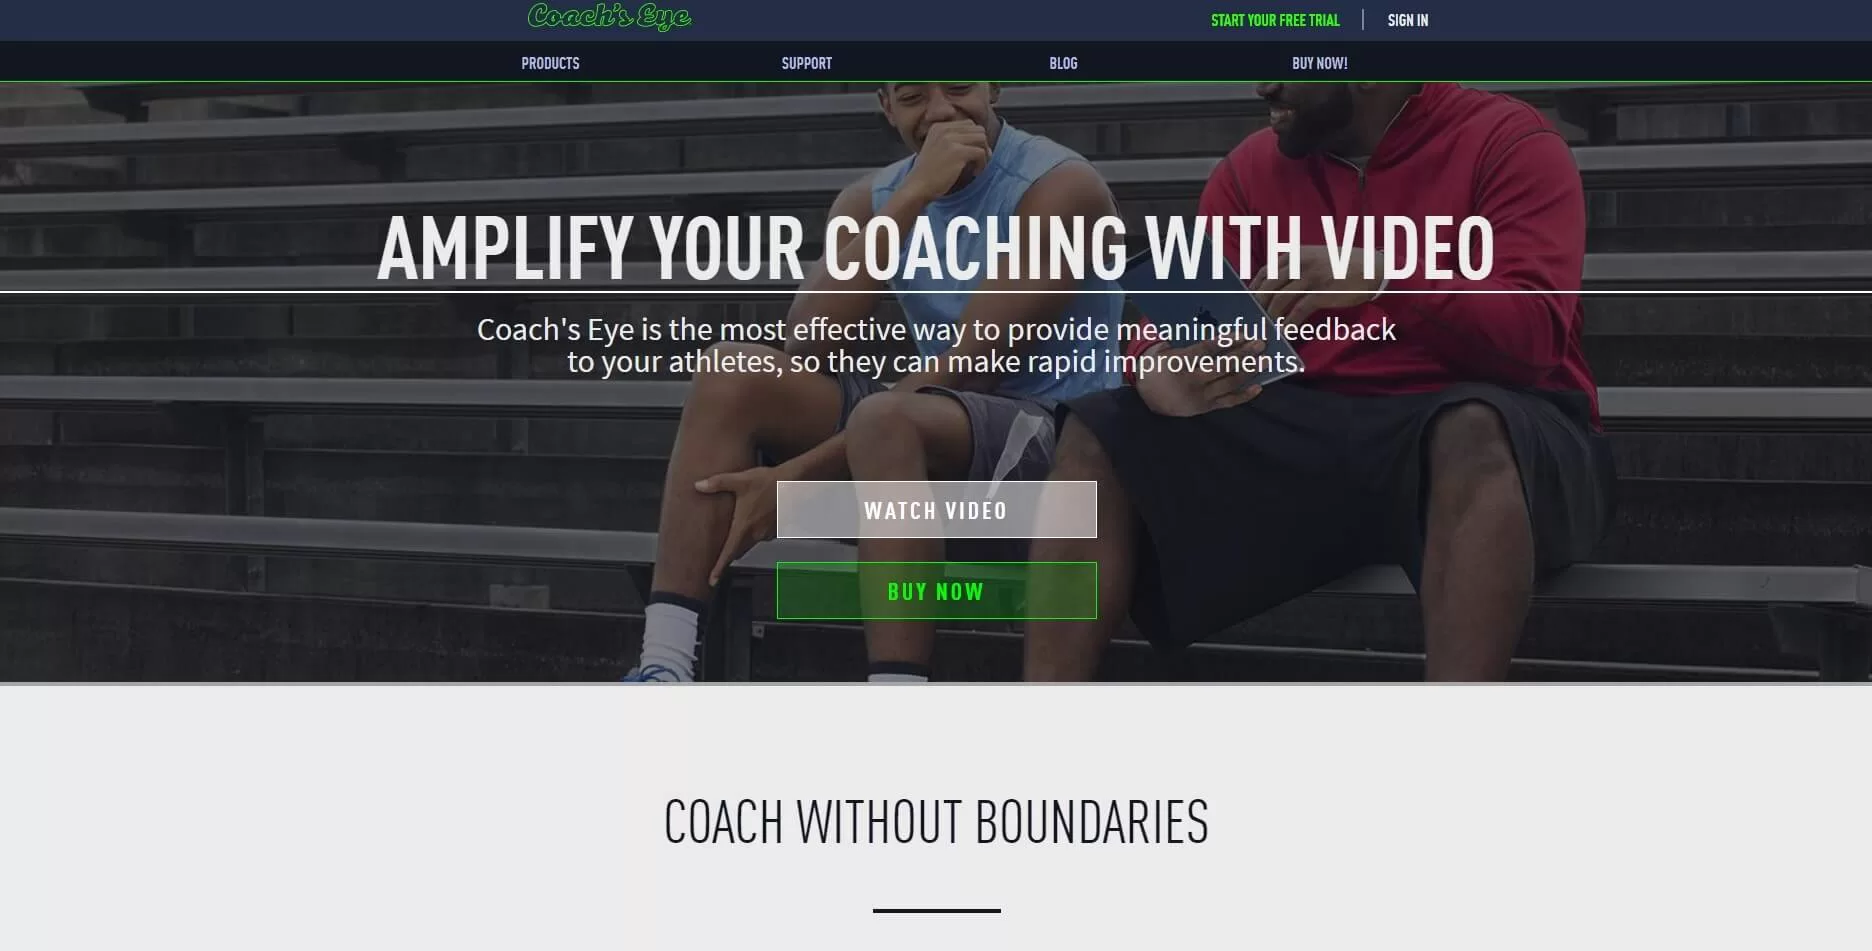 Landing page conversion analysis for Fitness Website Coach's Eye